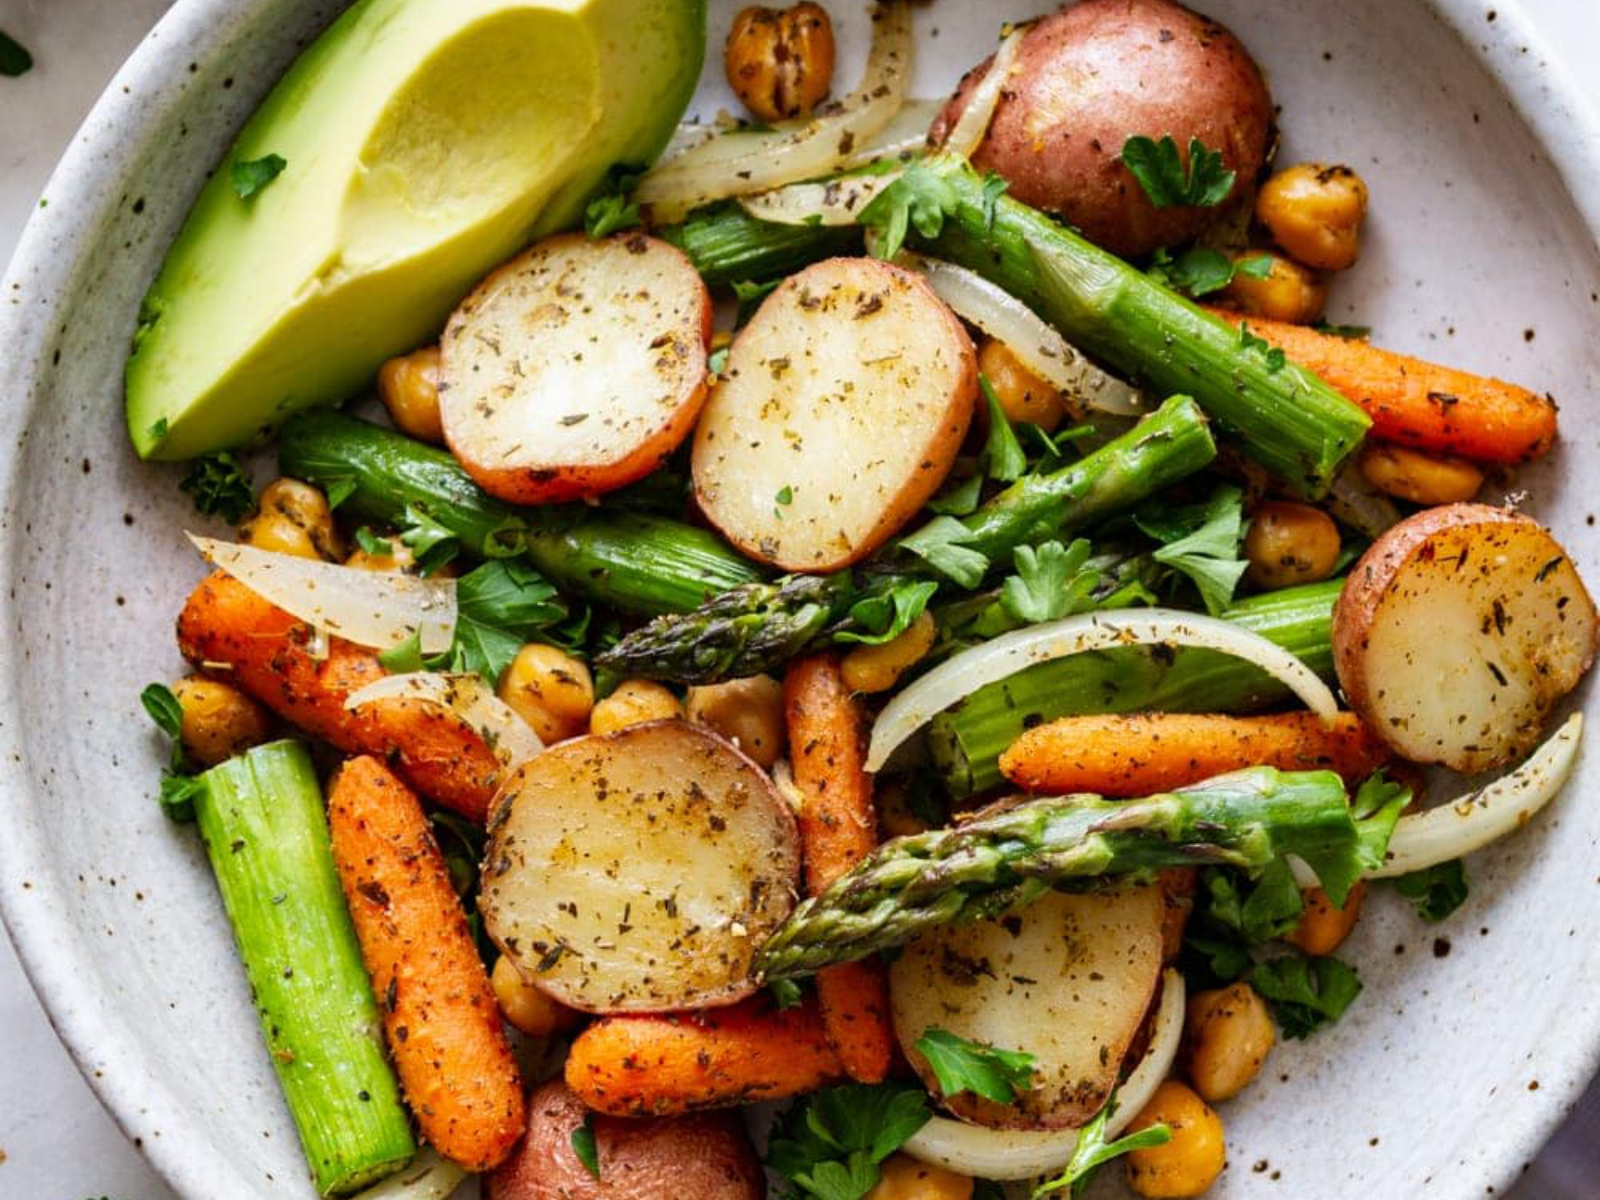 Vegan Sheet Pan Dinner with Herbed Potato, Asparagus, and Chickpeas